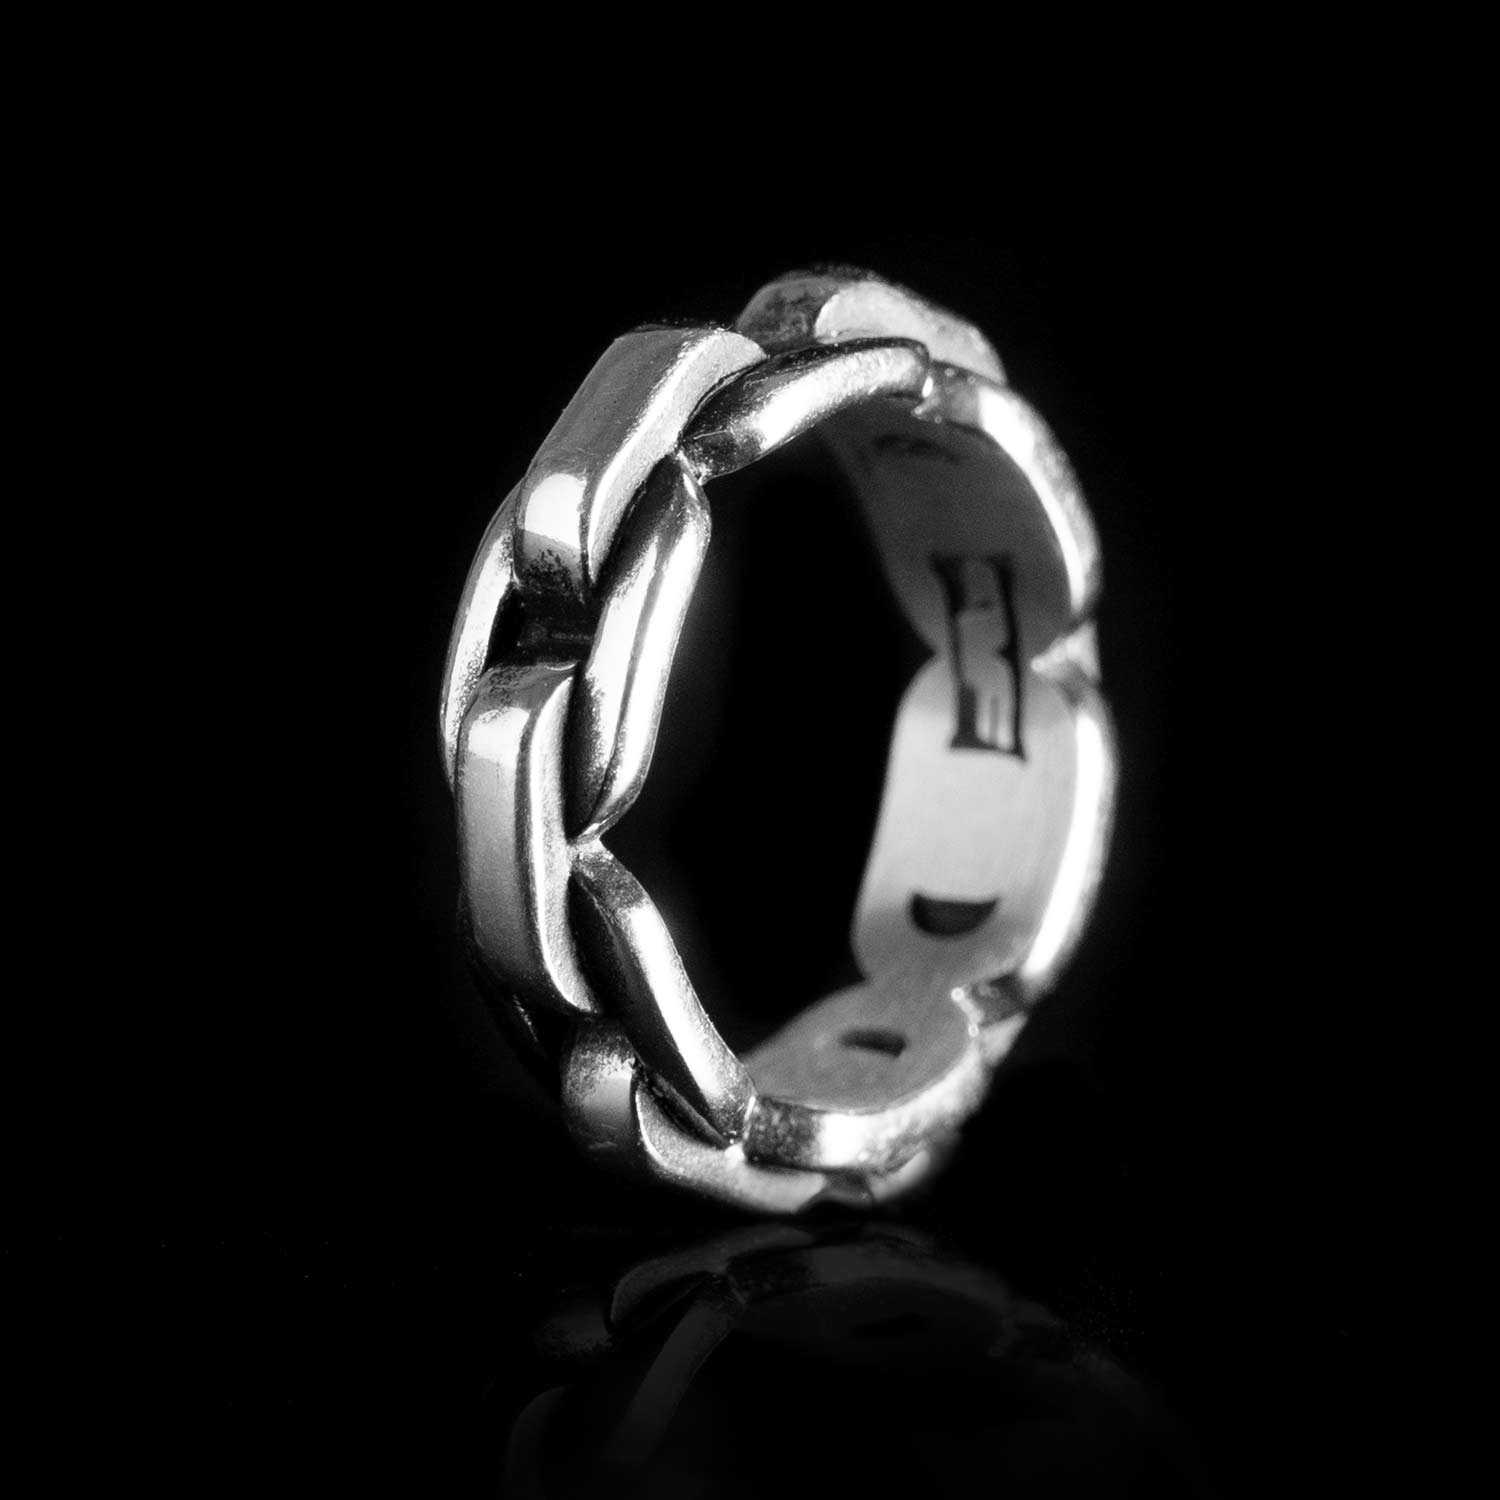 Tether Link Ring